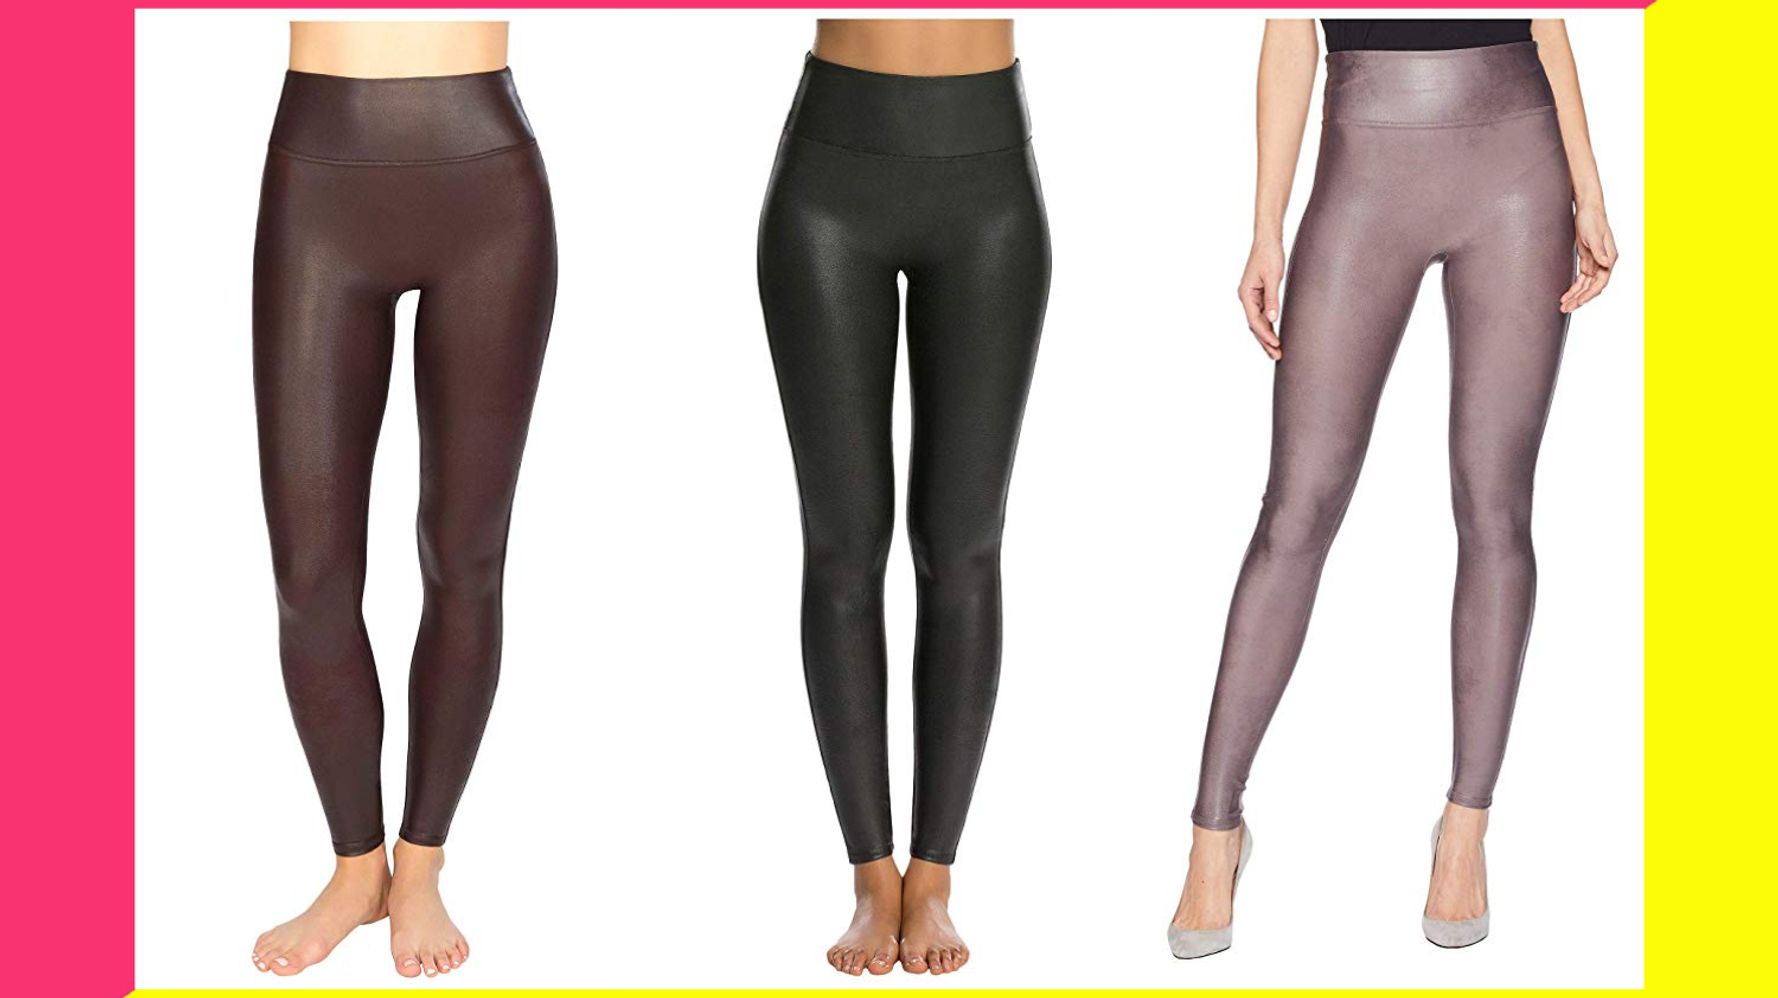 The Spanx Leather Leggings Are Still On Sale For Cyber Monday At One Place